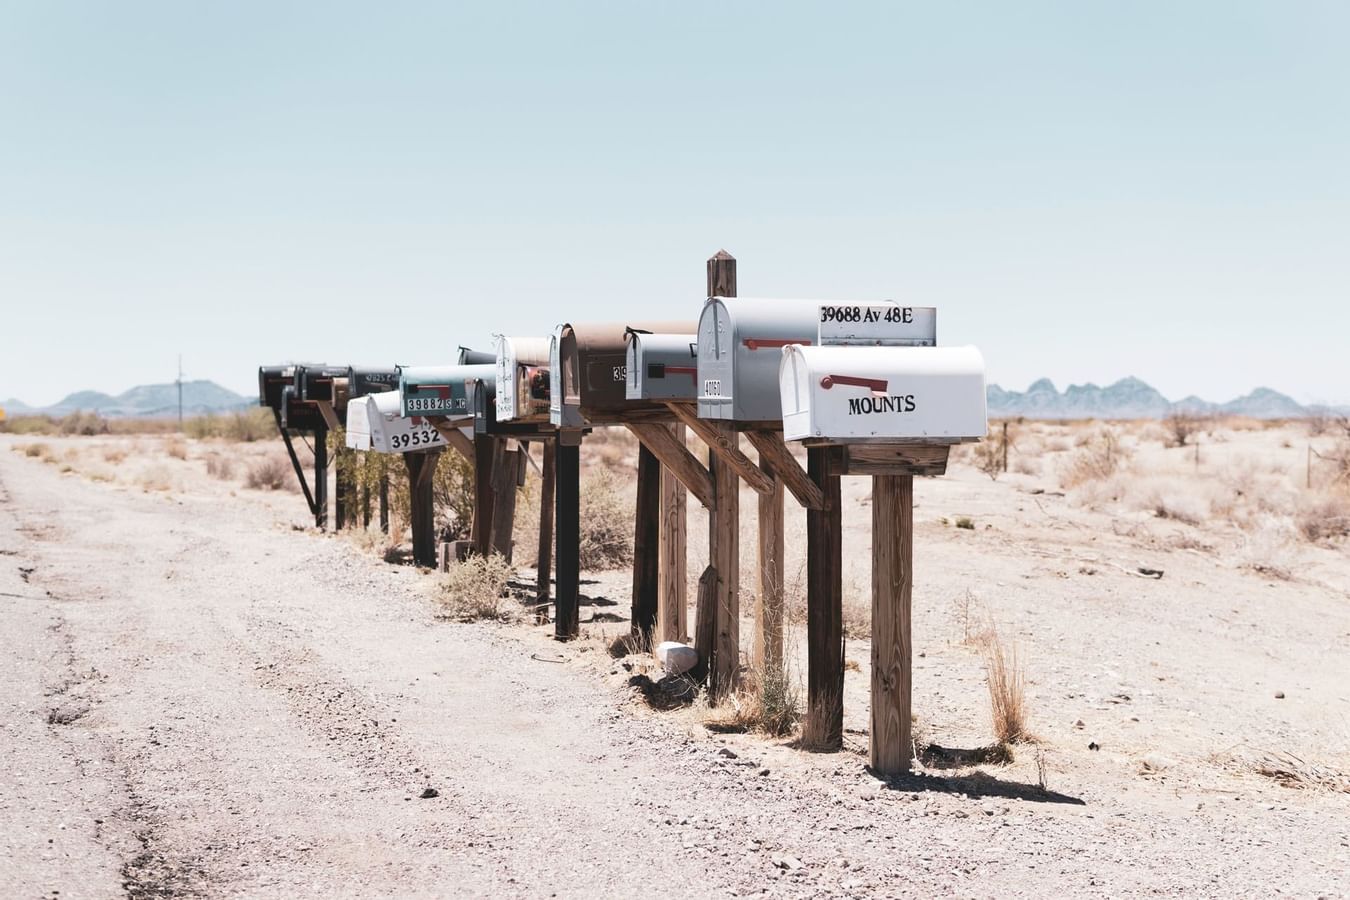 A row of mail boxes lined near The Originals Hotels